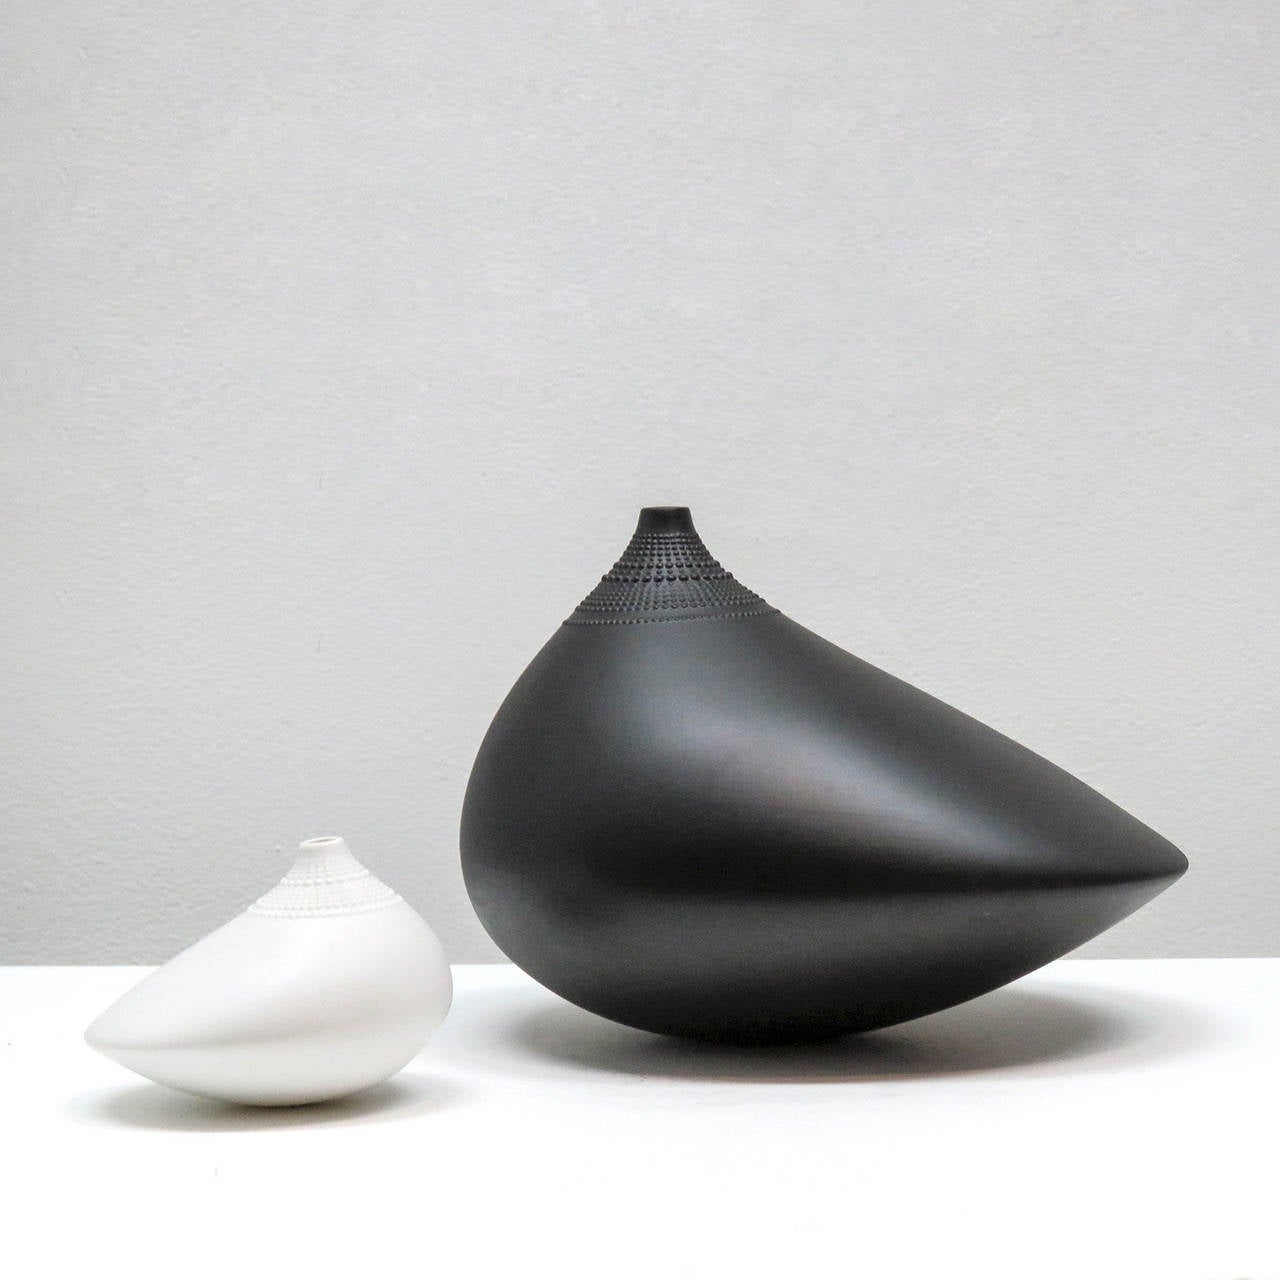 Beautiful matte black porcelain vase by Tapio Wirkkala for Rosenthal Studio-Line, comprised of a narrow neck with beaded collar and an elongated asymmetrically bulbous body, marked.